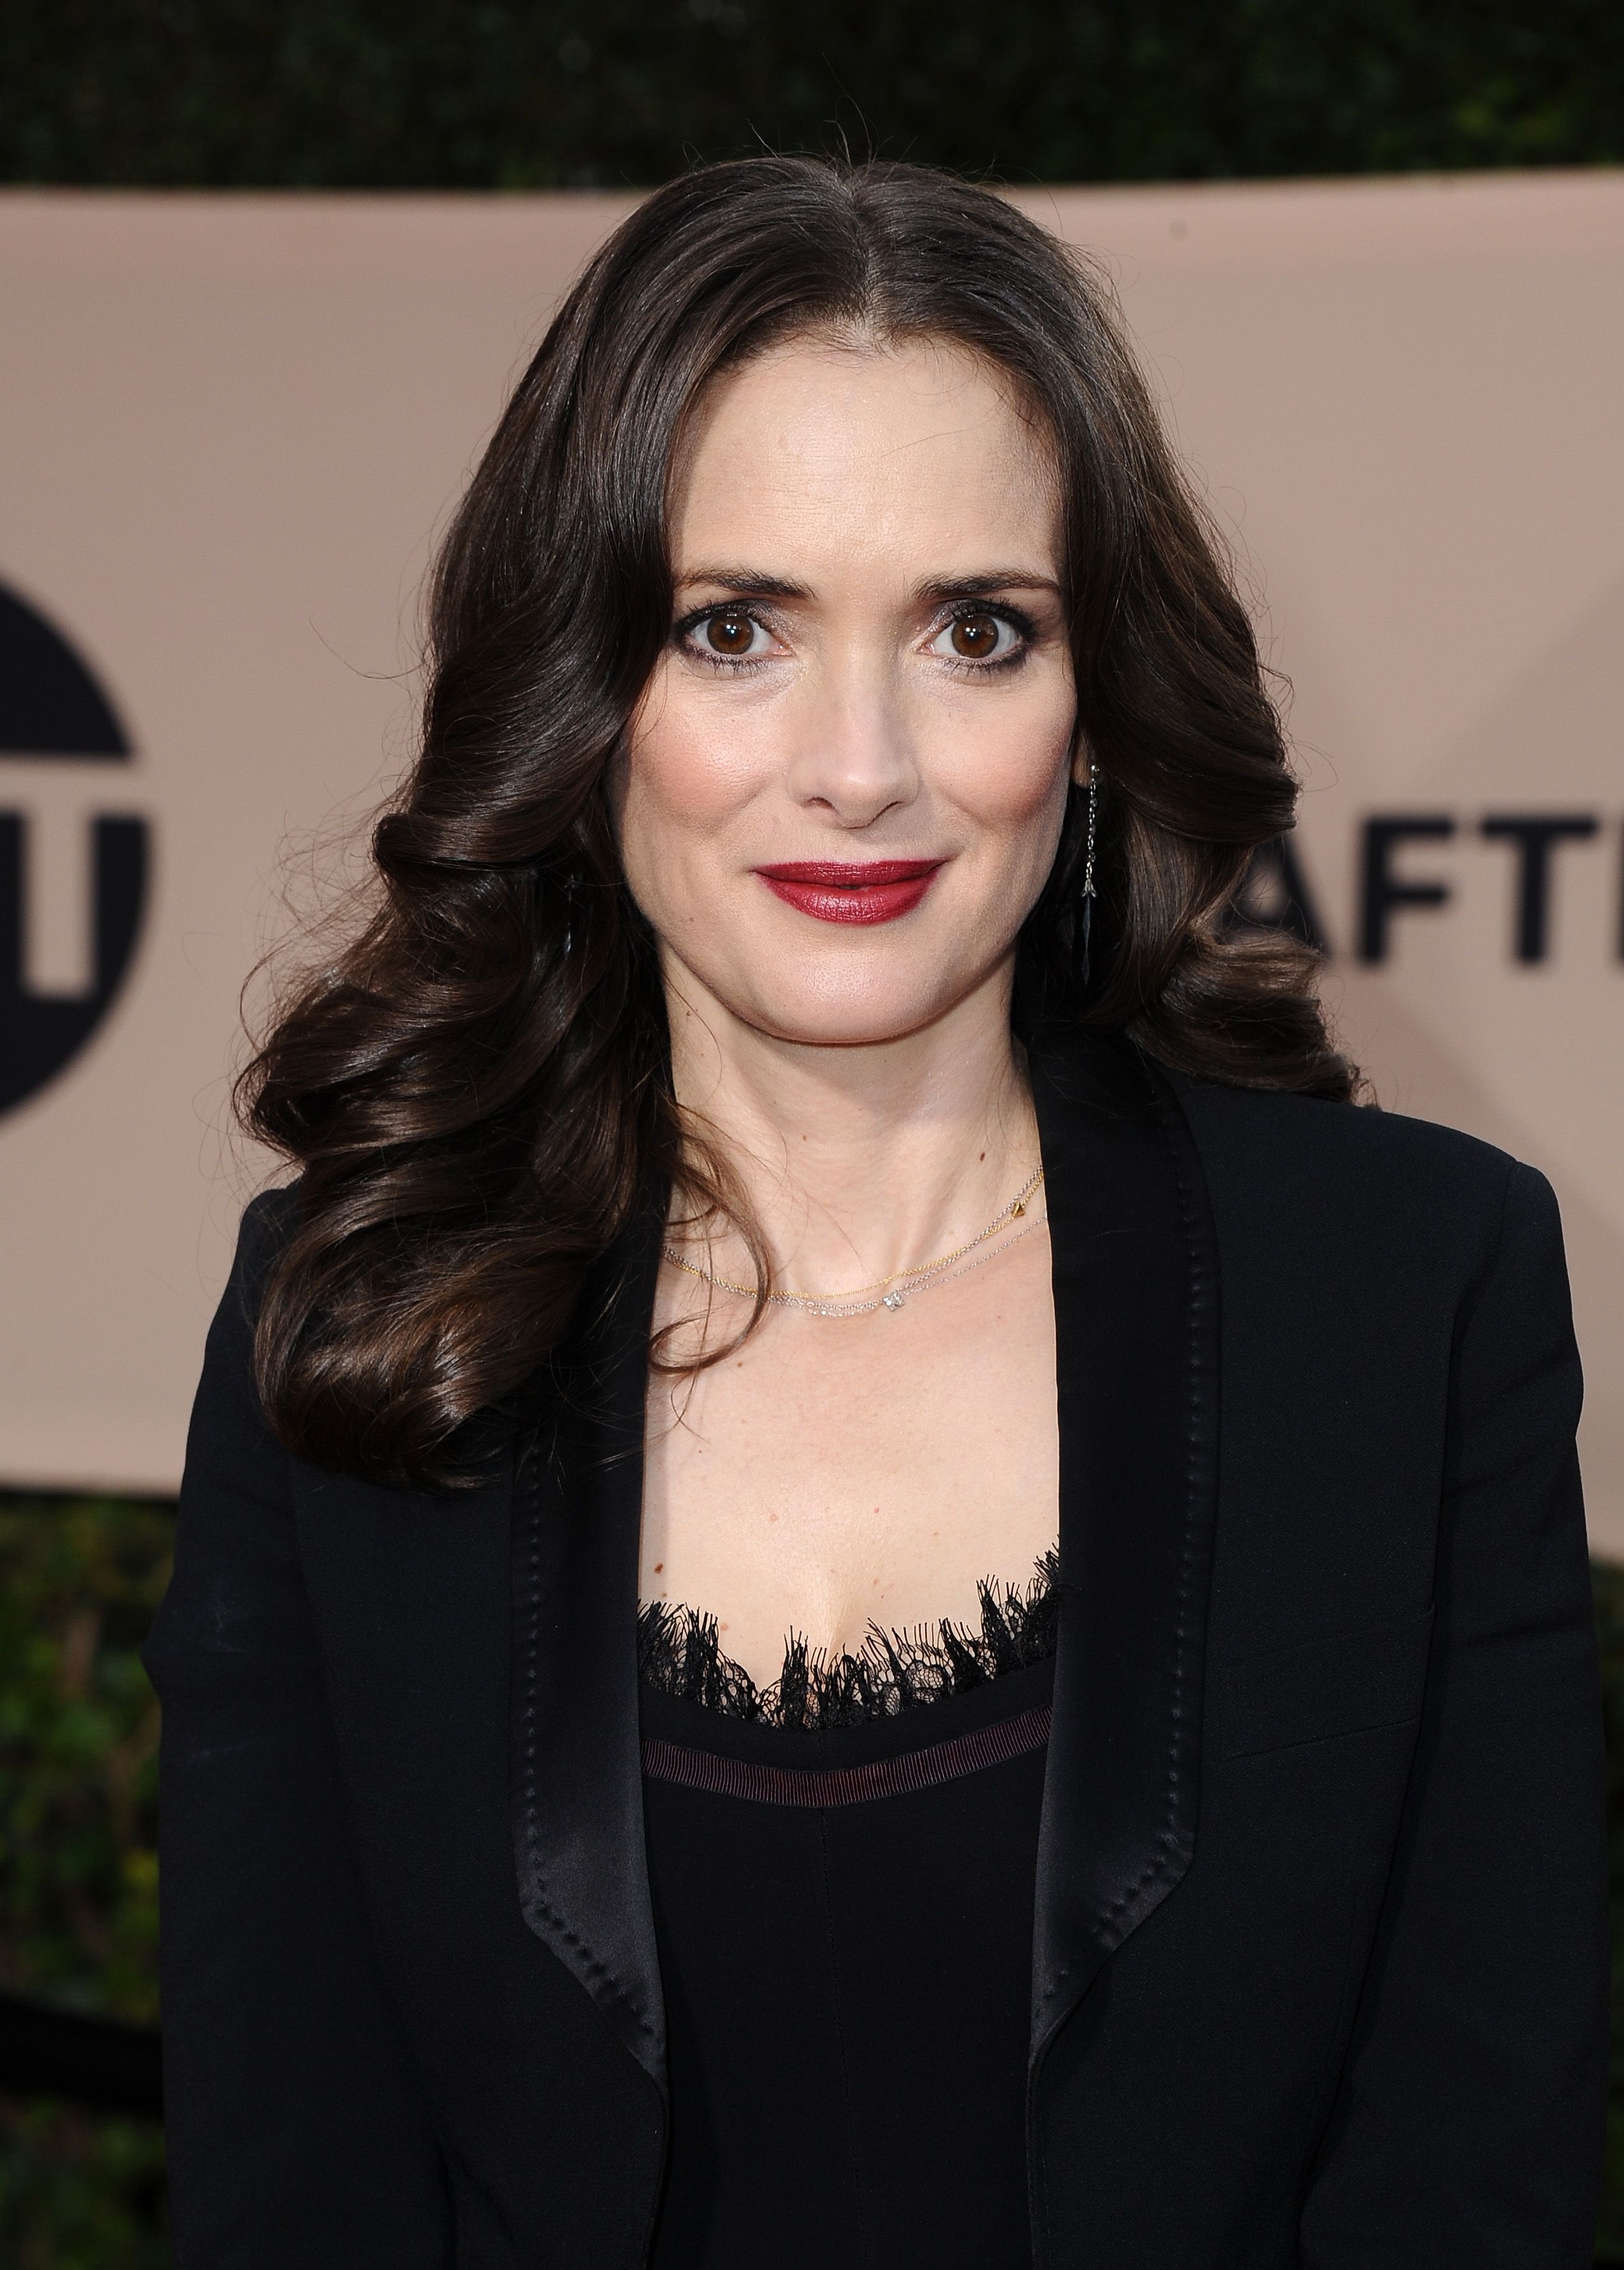 Actress Winona Ryder| Photo: Getty Images